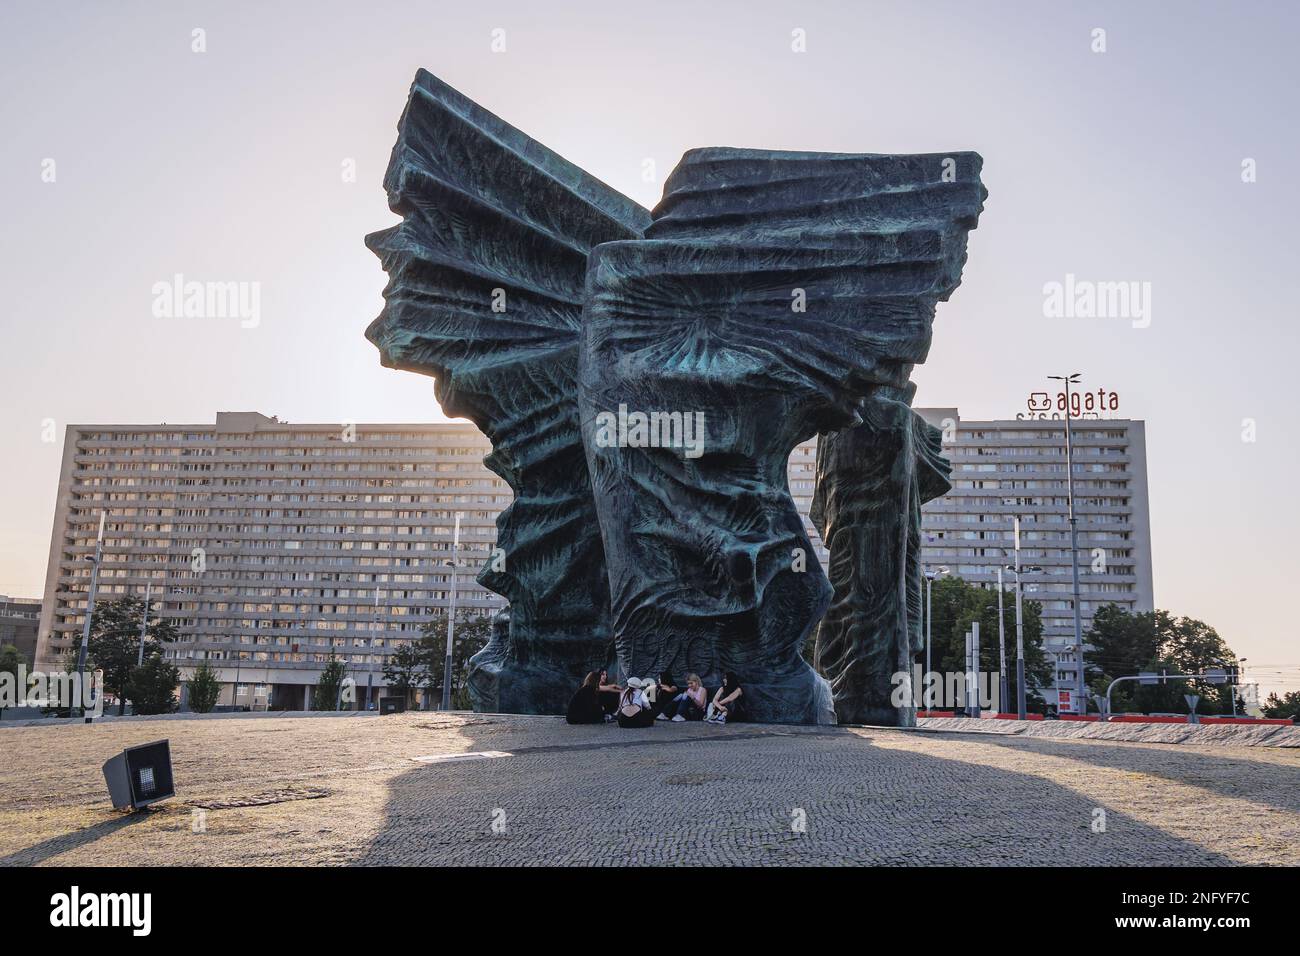 Silesian Insurgents Monument and Superjednostka - Superunit residential building in Katowice city, Silesia region of Poland Stock Photo